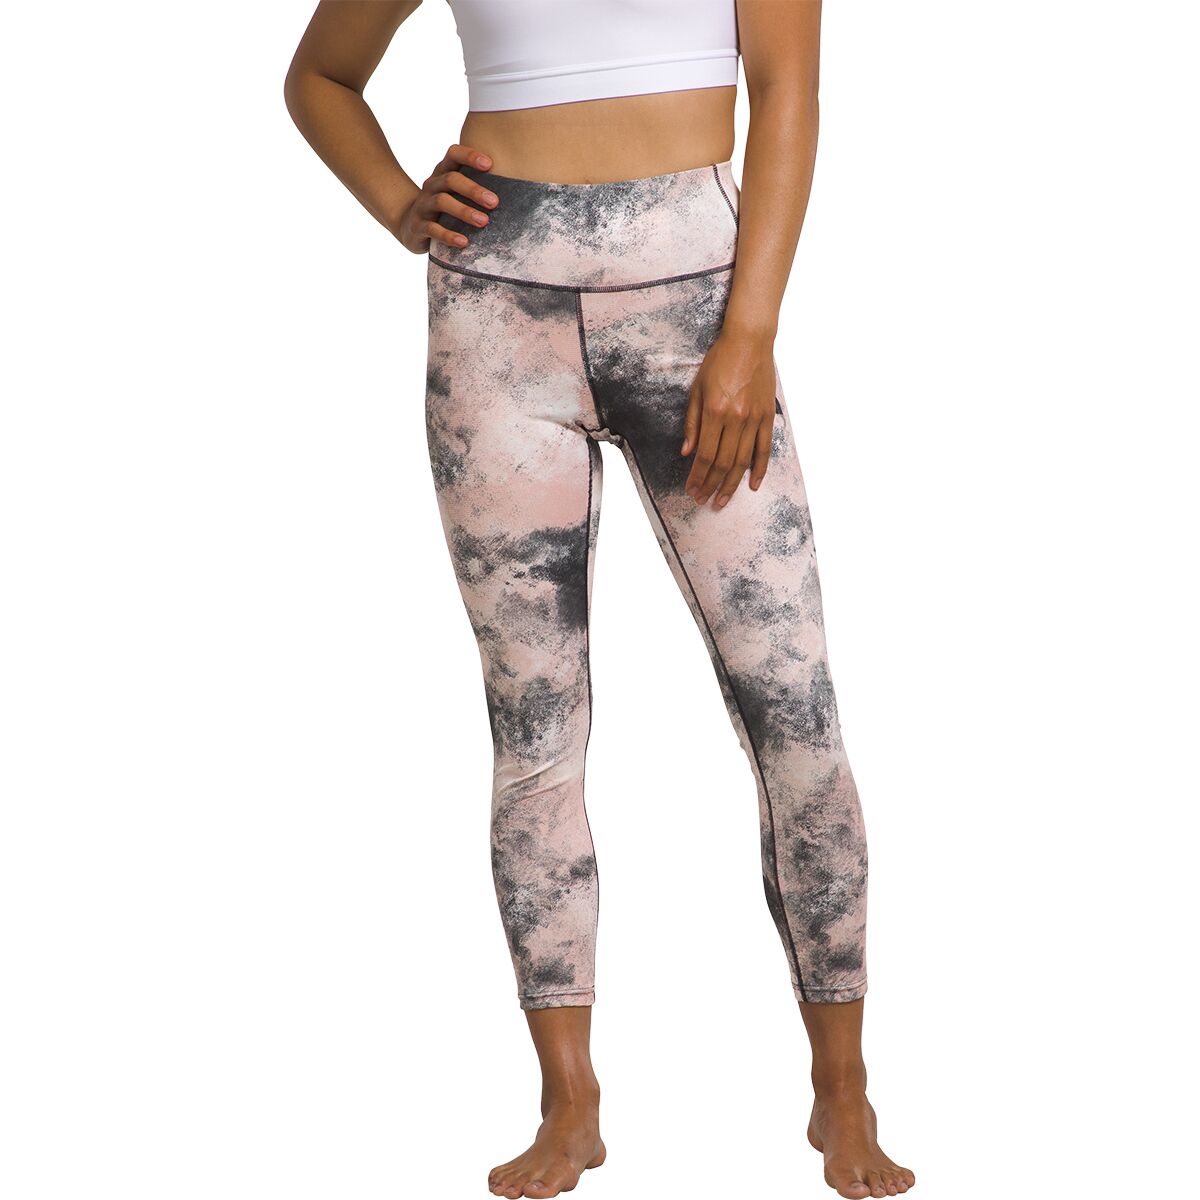 The North Face FD Pro 160 Tight - Women's Pink Moss Faded Dye Camo Print